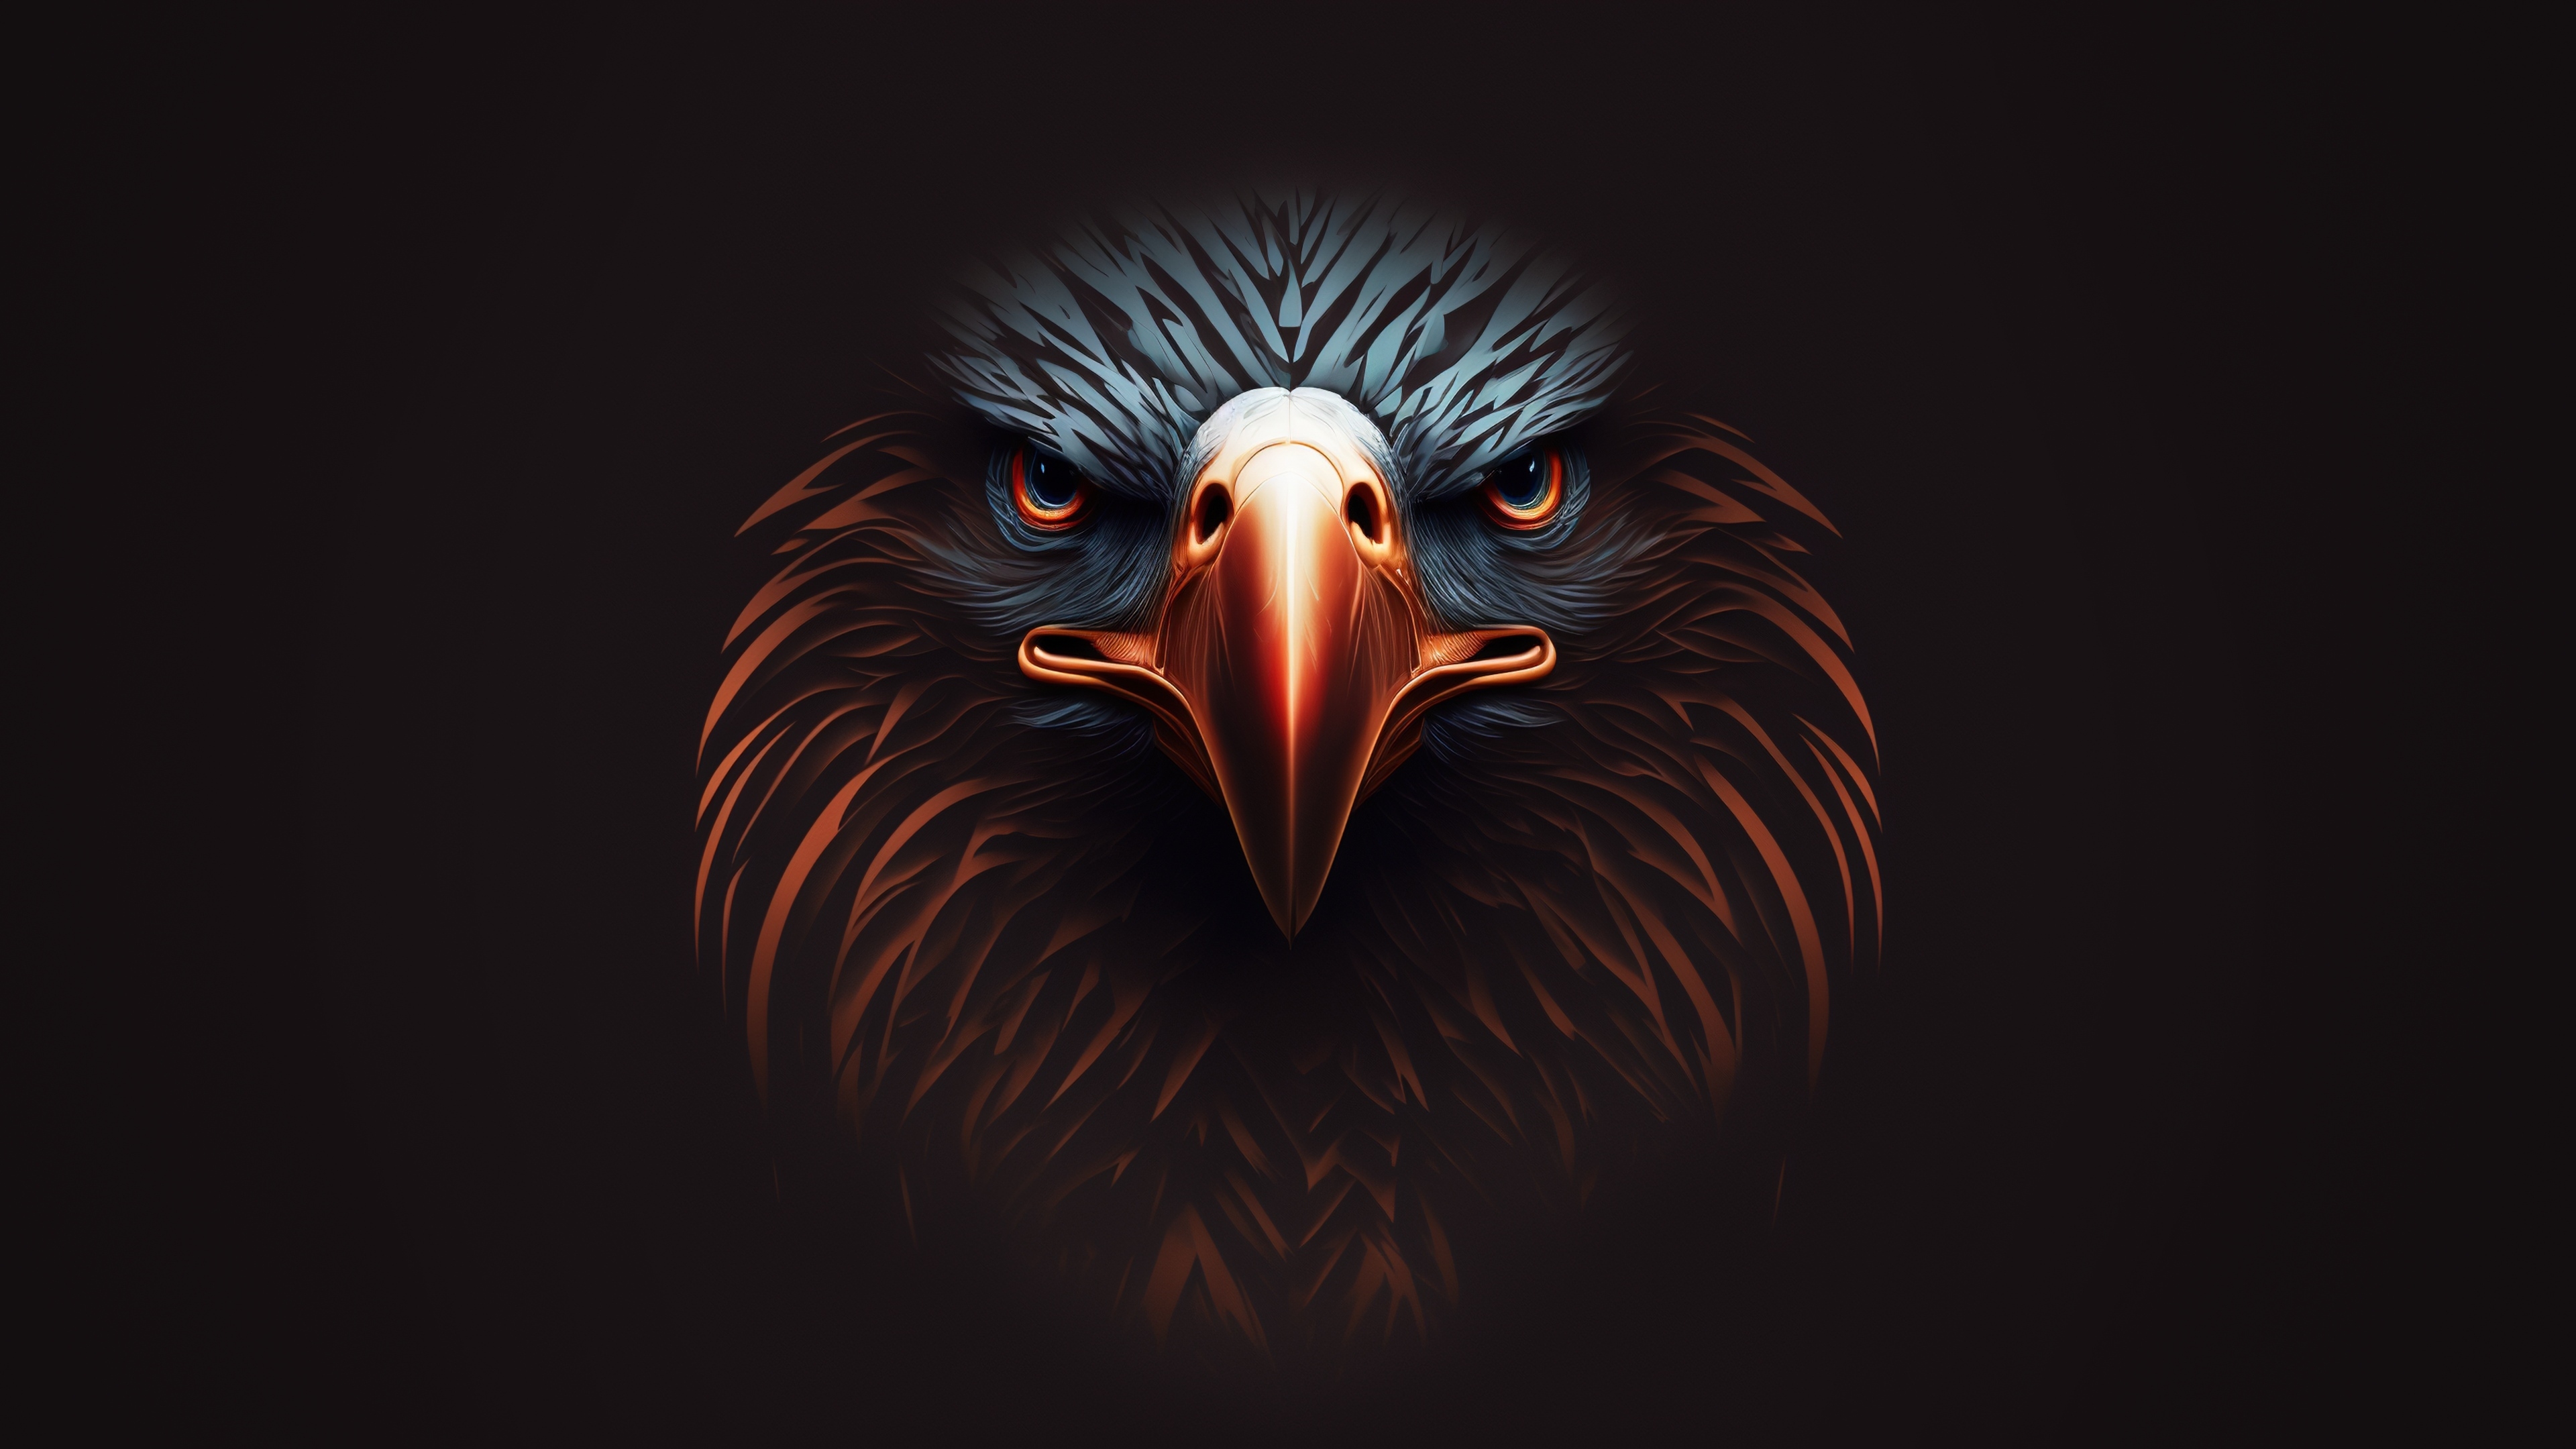 1080x1920 Eagle Wallpapers for Android Mobile Smartphone Full HD